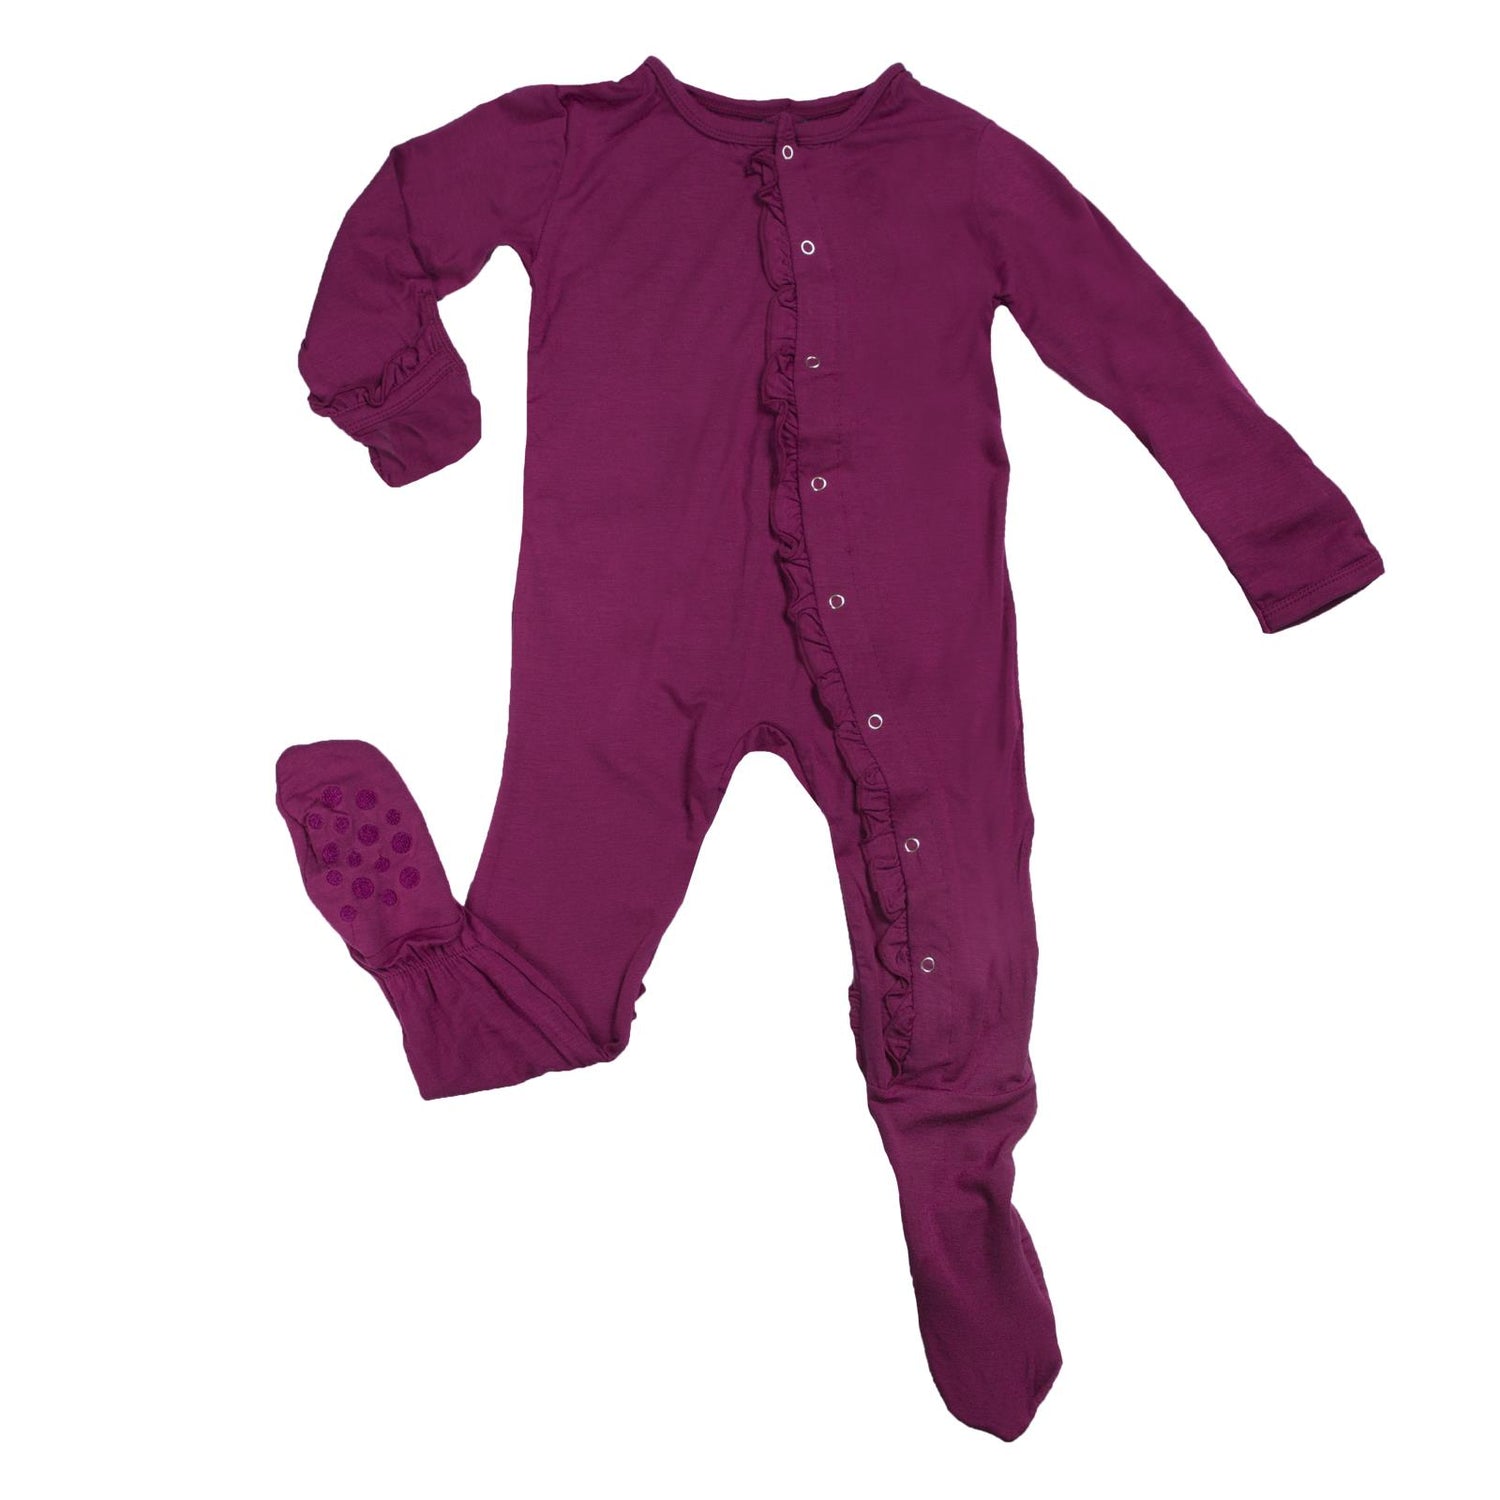 Classic Ruffle Footie with Snaps in Orchid